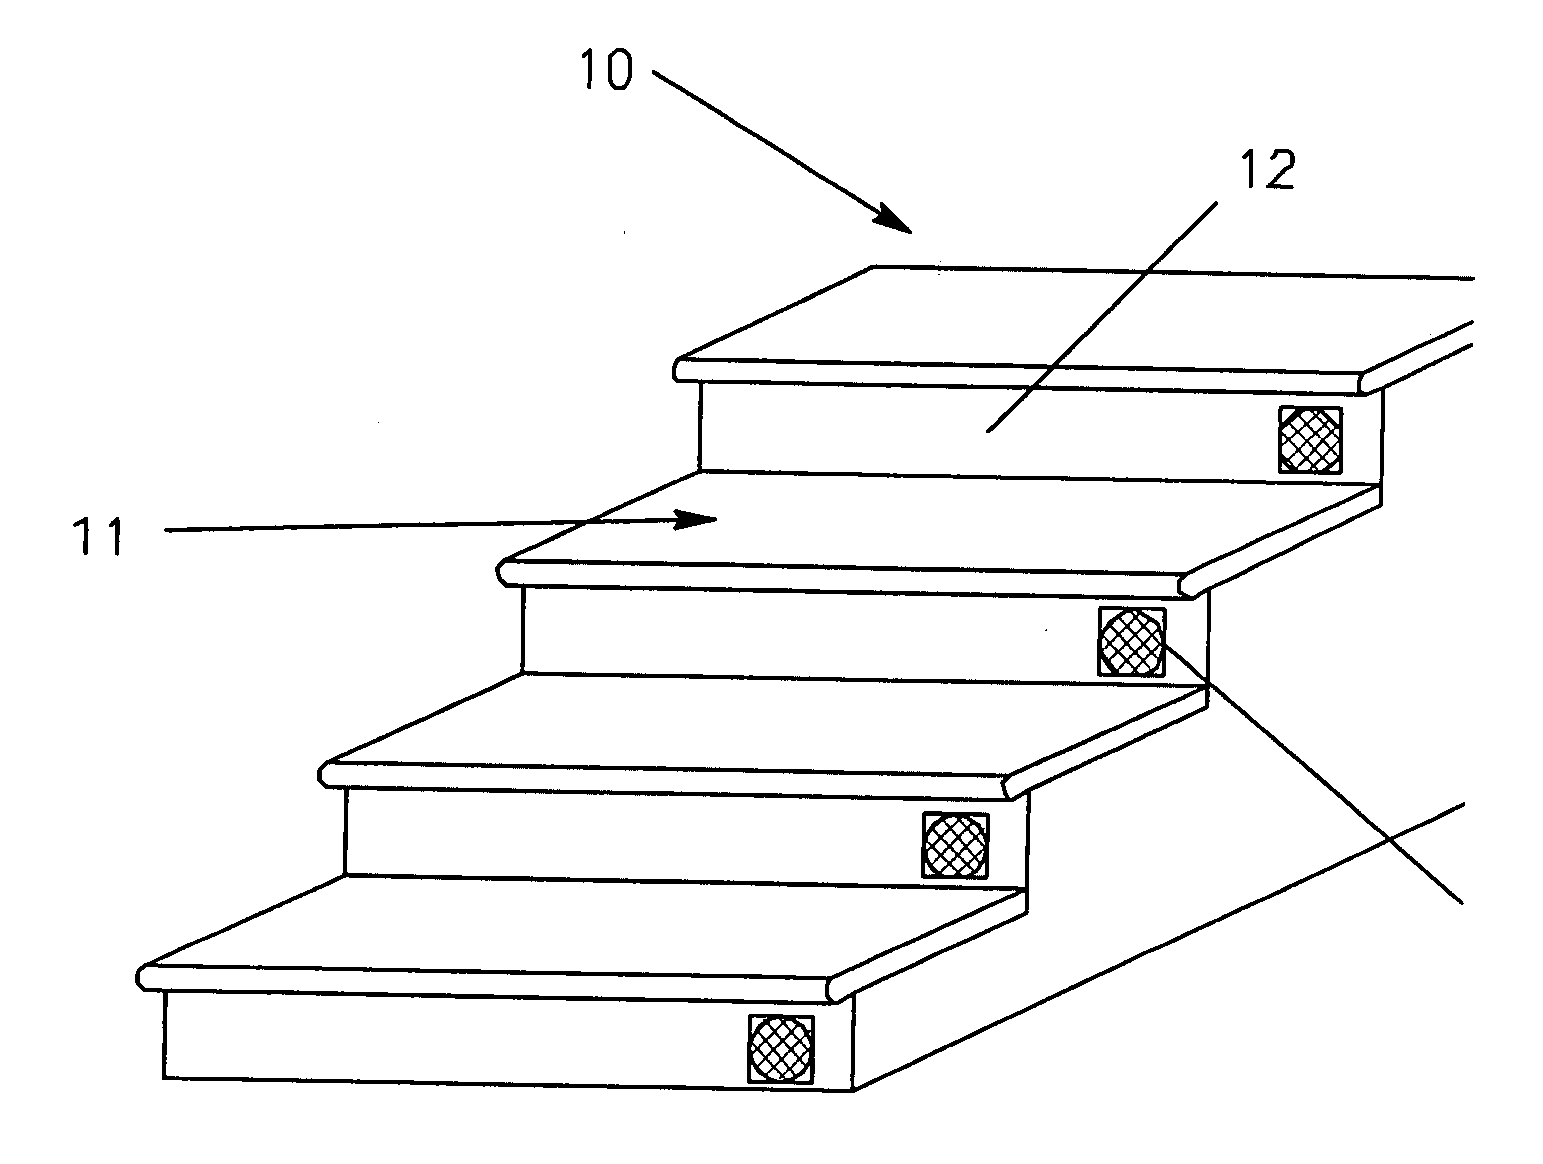 Position indicating steps